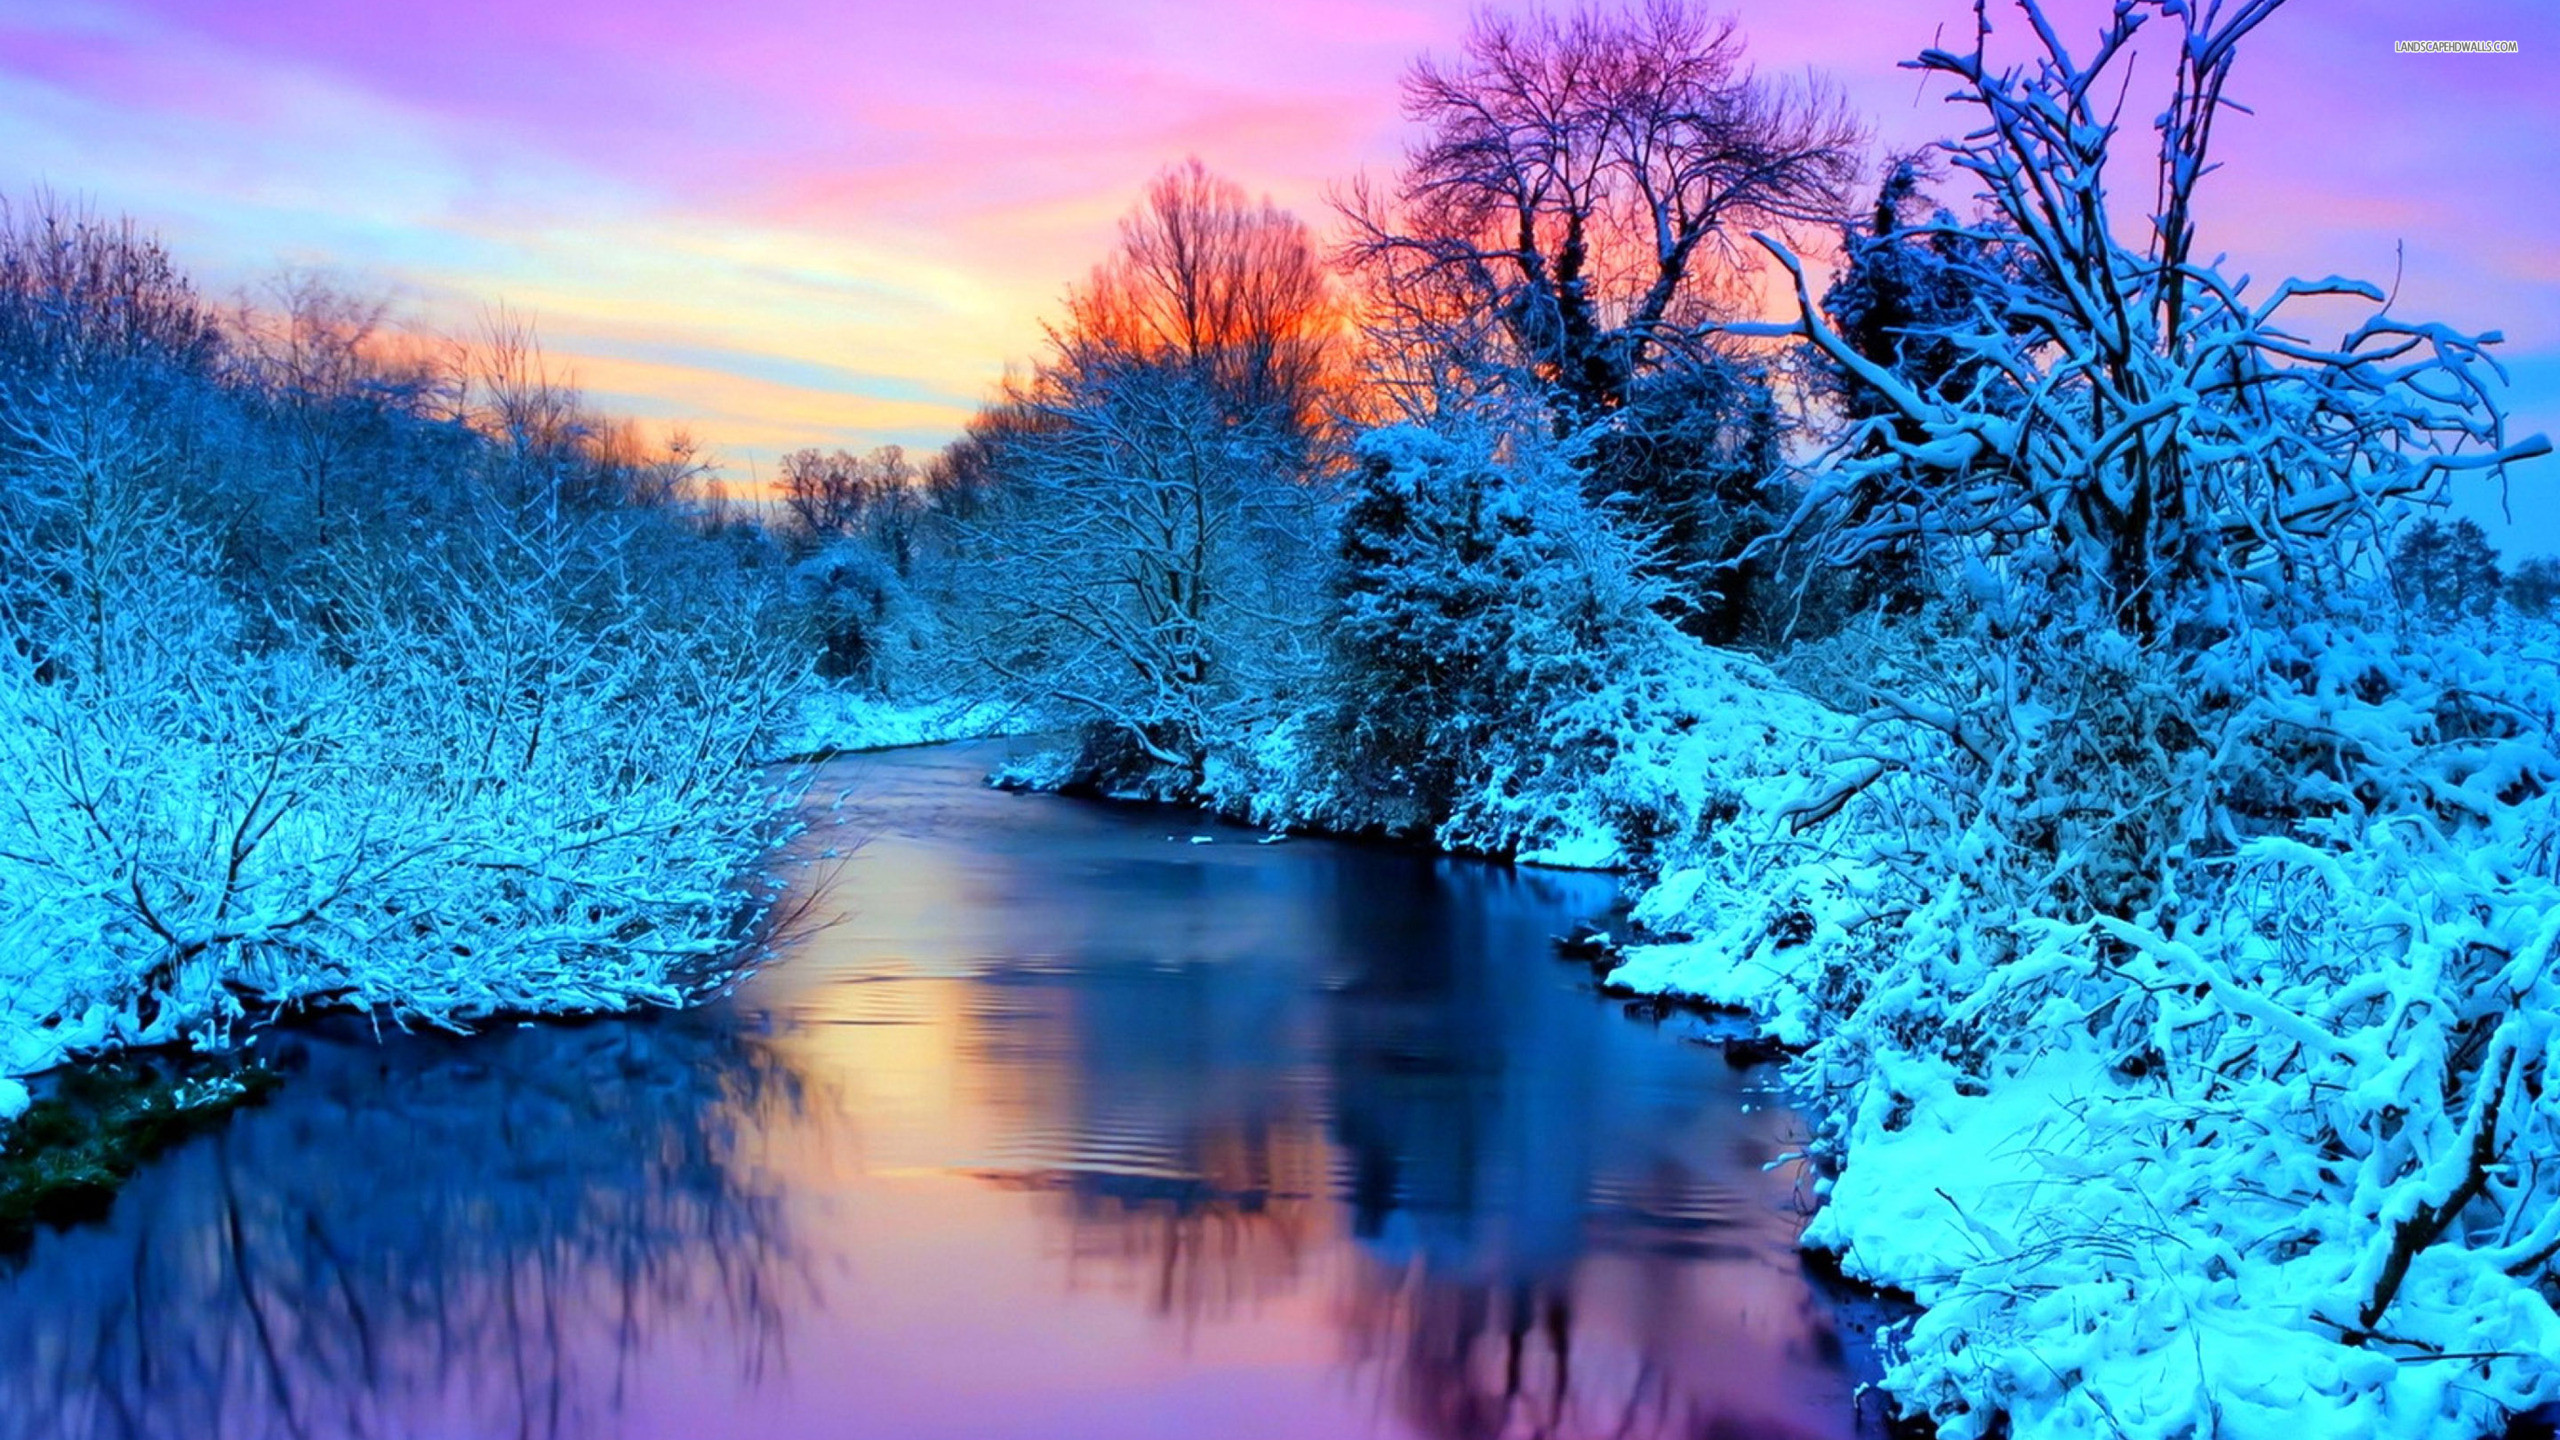 winter scenery backgrounds